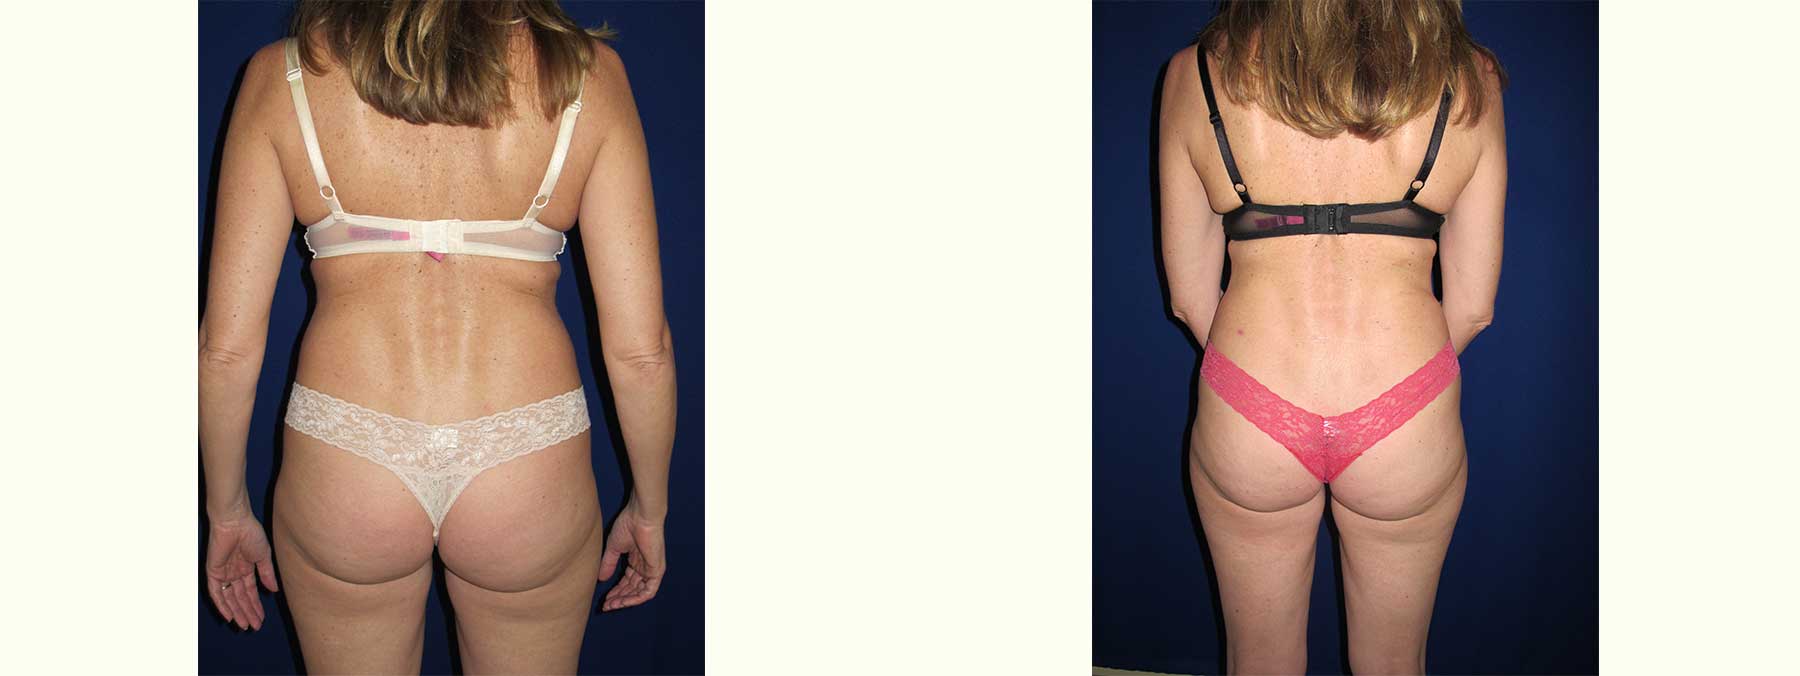 Before and After Image of Liposuction